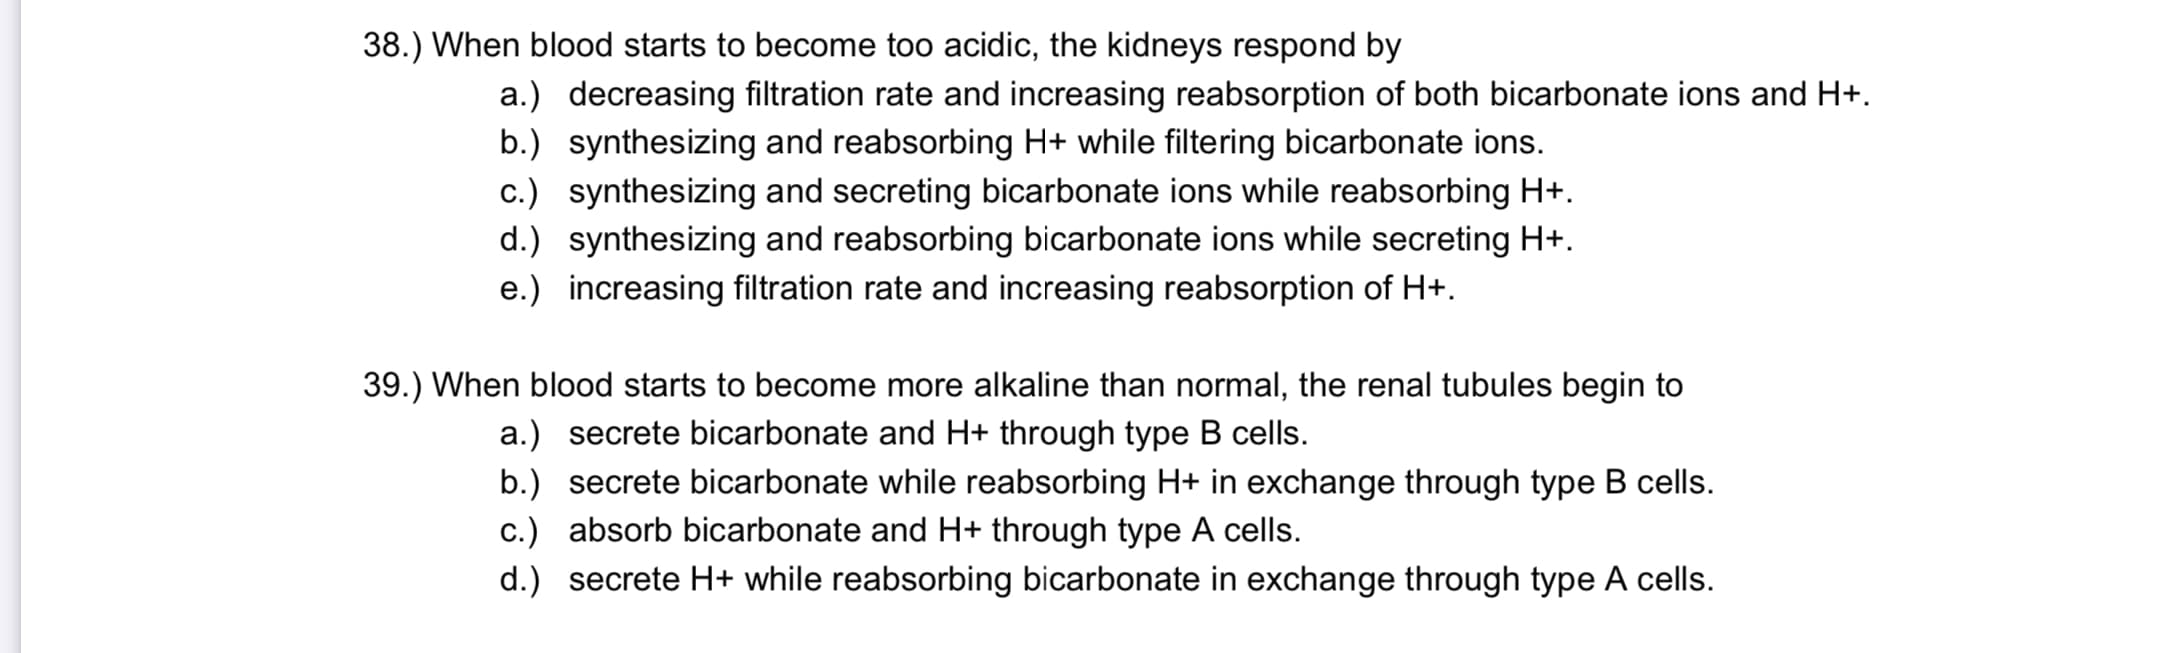 When blood starts to become too acidic, the kidneys respond by
a.) decreasing filtration rate and increasing reabsorption of both bicarbonate ions and H+.
b.) synthesizing and reabsorbing H+ while filtering bicarbonate ions.
c.) synthesizing and secreting bicarbonate ions while reabsorbing H+.
d.) synthesizing and reabsorbing bicarbonate ions while secreting H+.
e.) increasing filtration rate and increasing reabsorption of H+.
